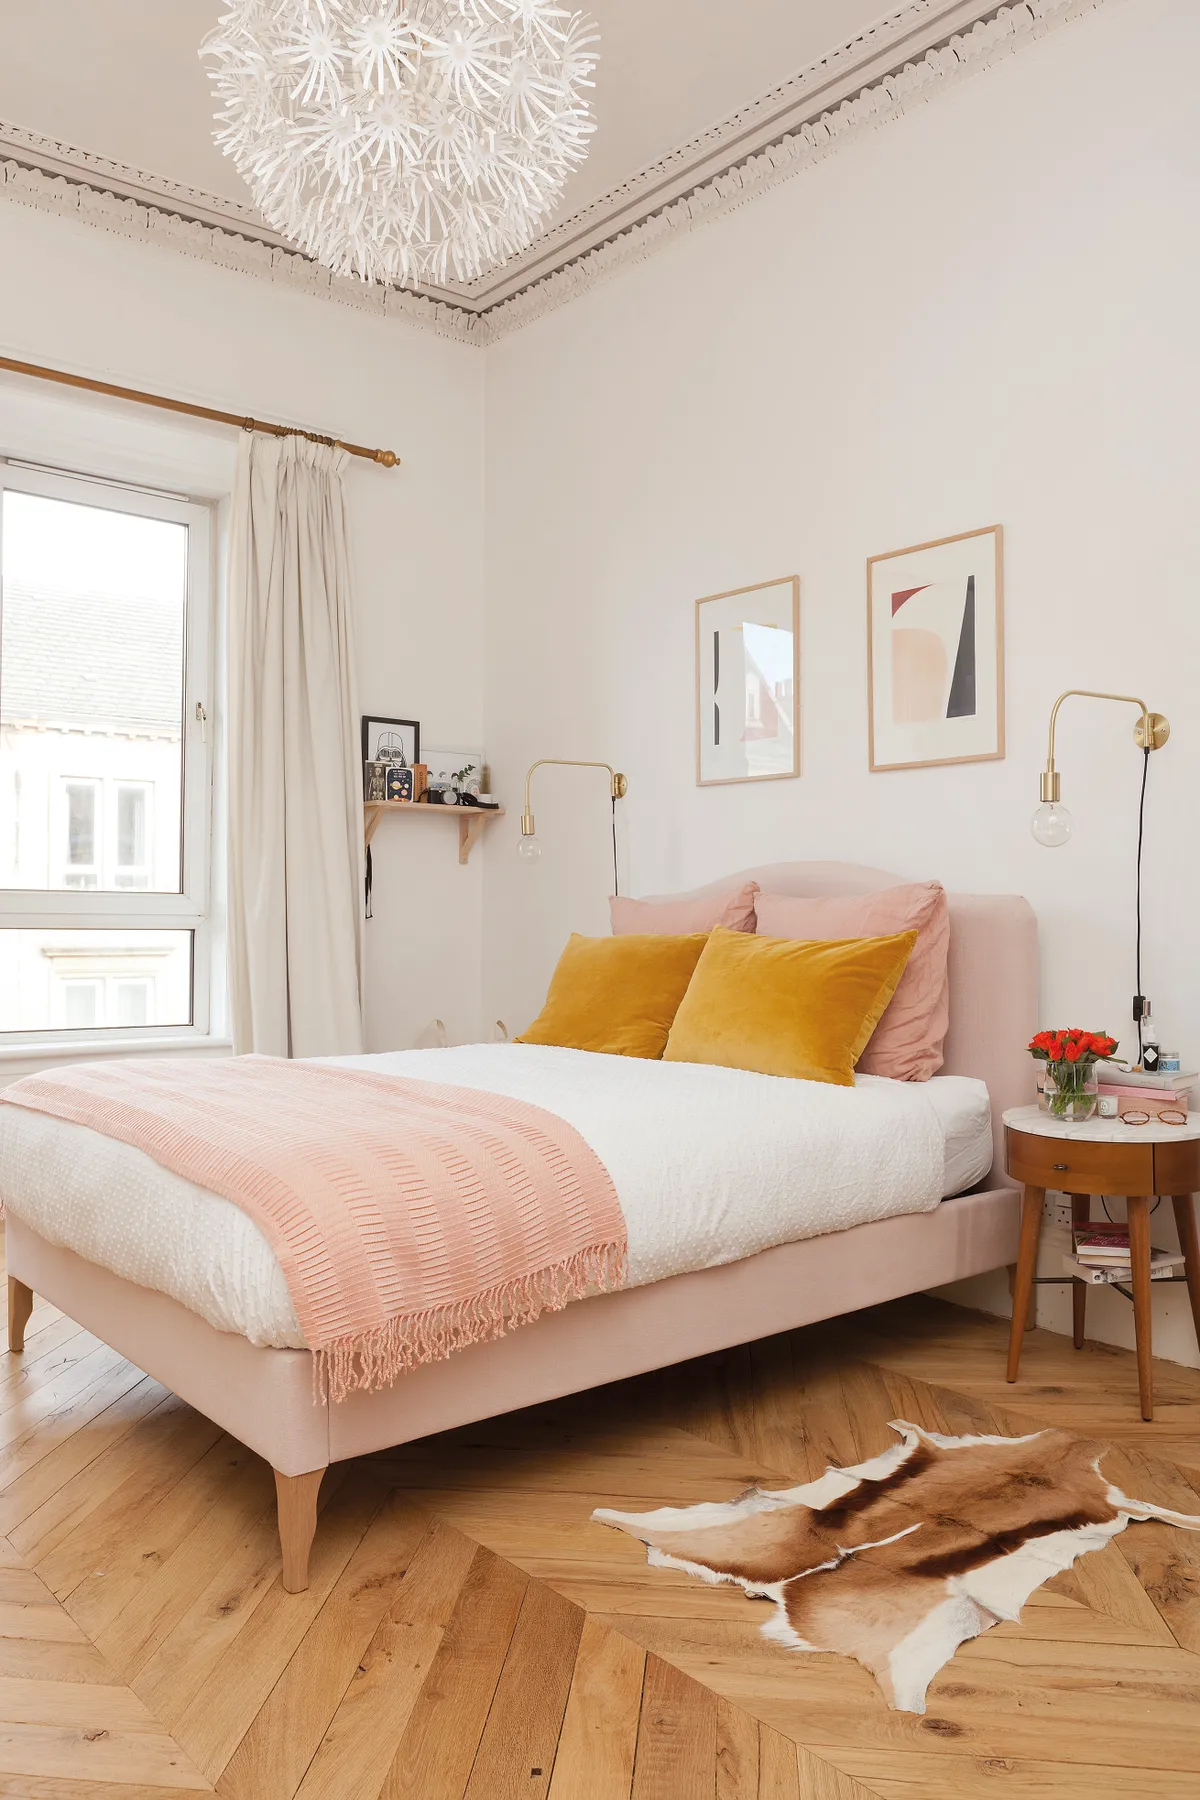 Kate wanted a mix of styles in her bedroom, which continues the muted colour scheme of her flat. The blush pink bed is from Made.com and the mid-century bedside tables are from West Elm